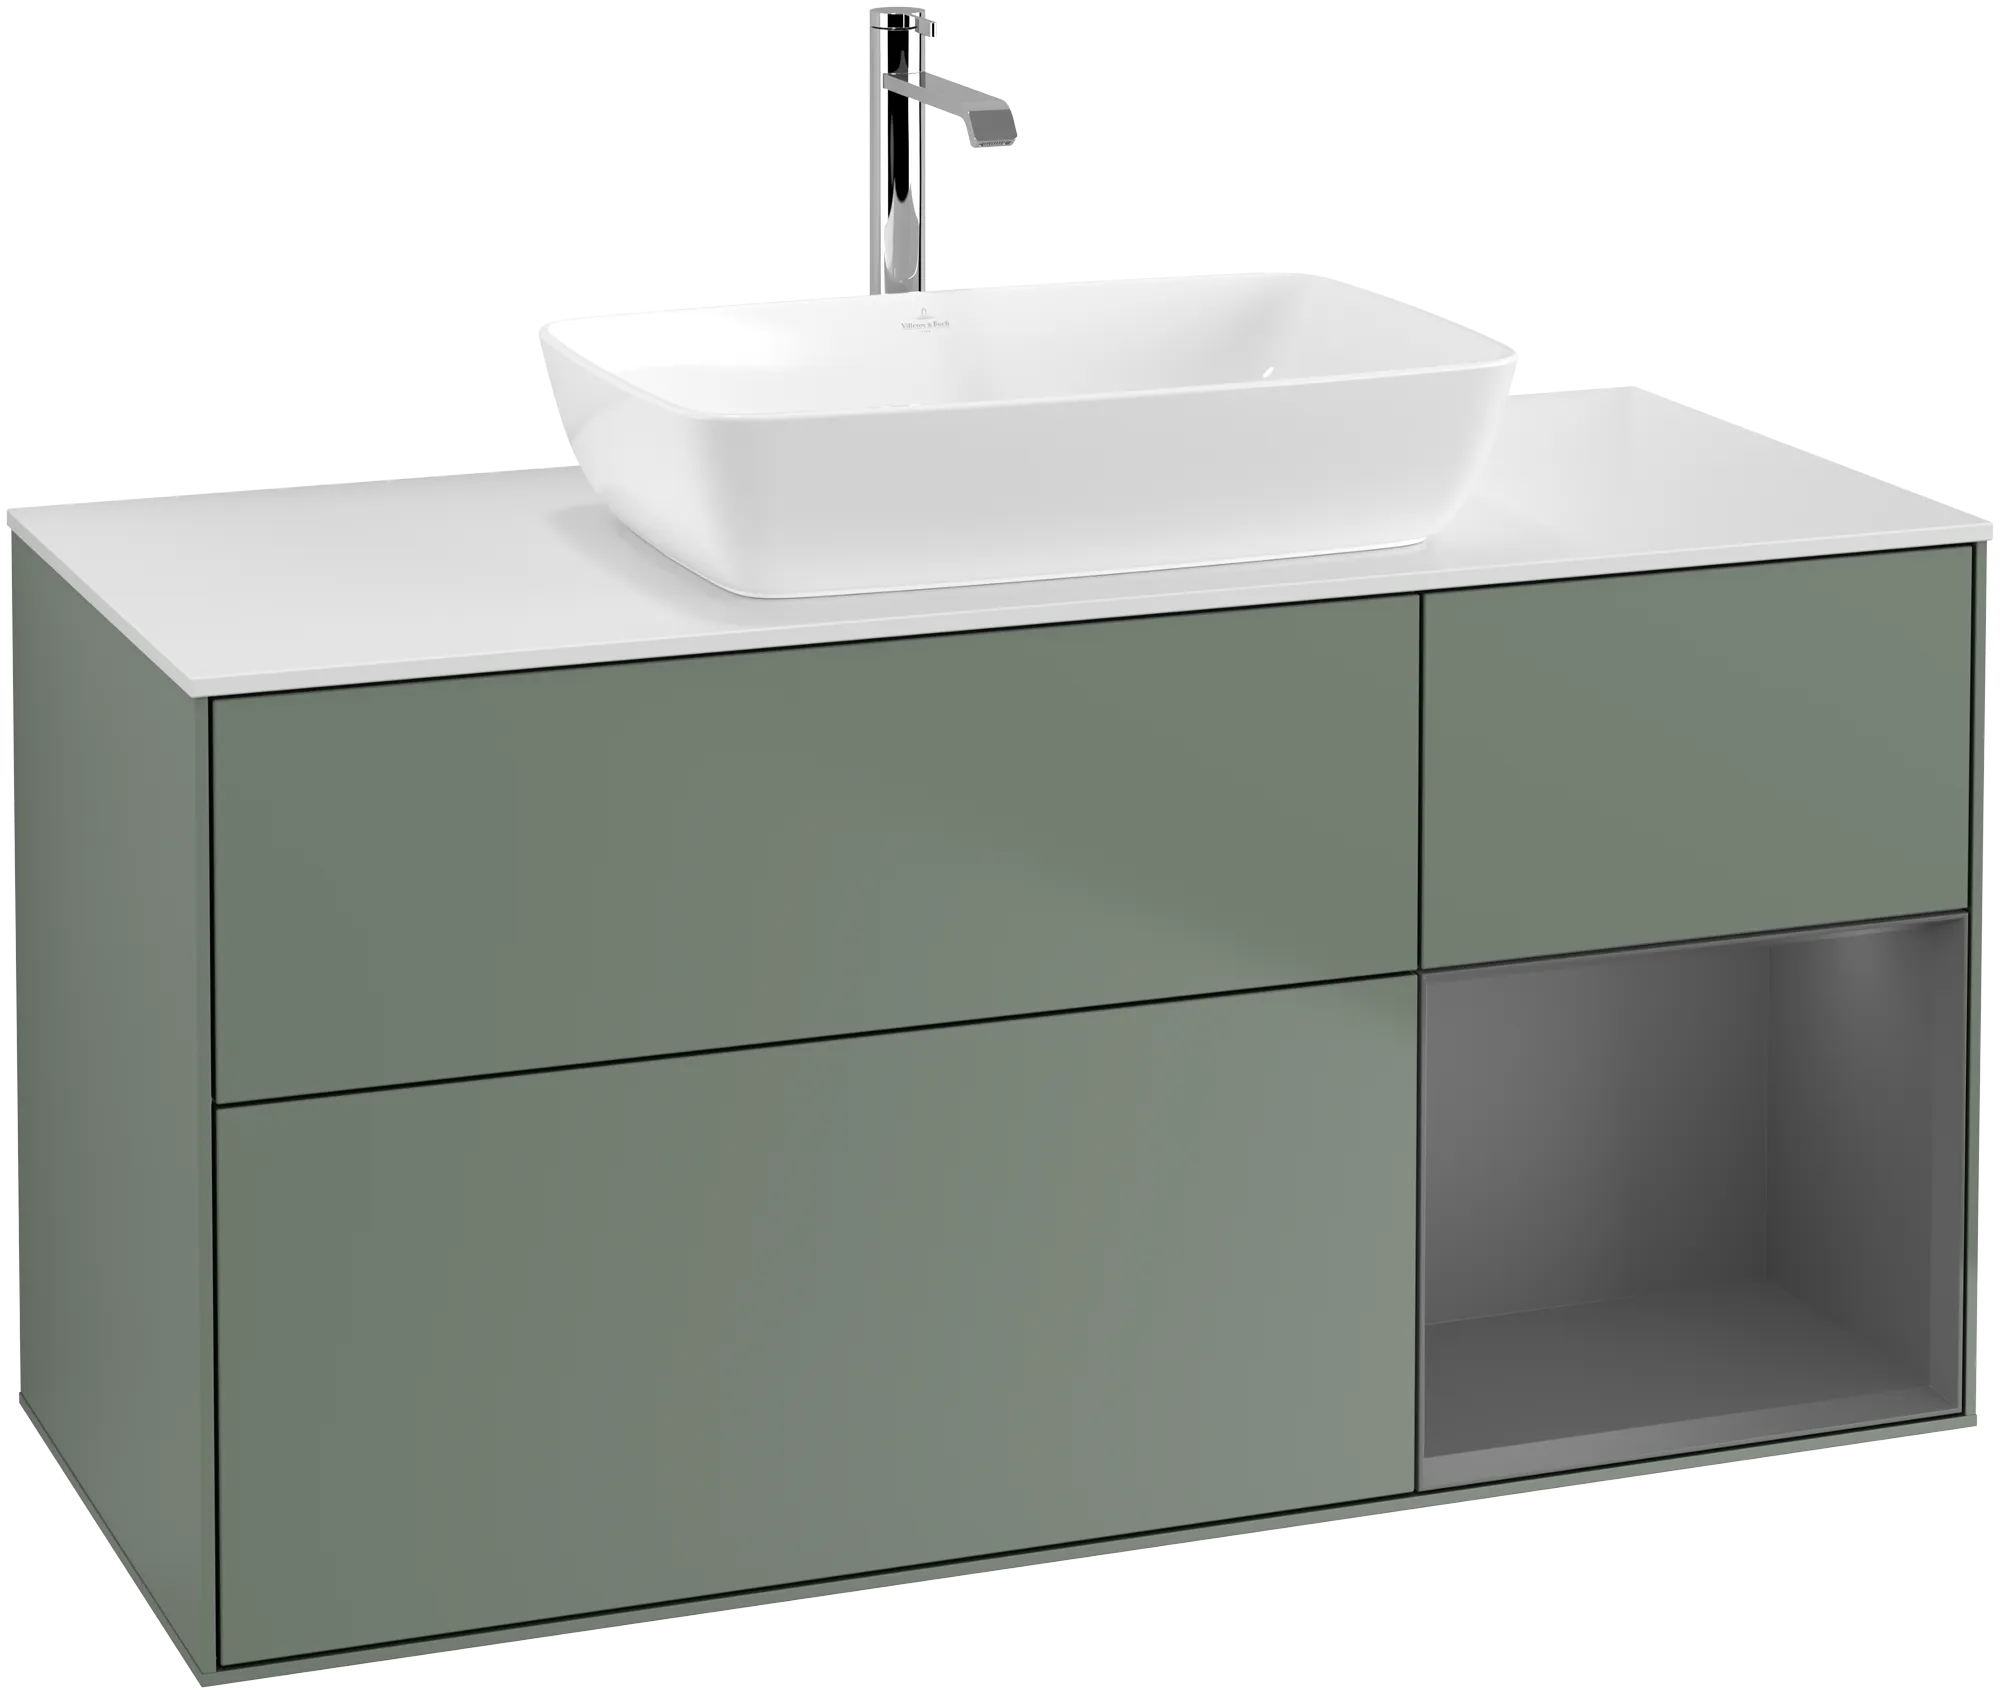 Picture of VILLEROY BOCH Finion Vanity unit, with lighting, 3 pull-out compartments, 1200 x 603 x 501 mm, Olive Matt Lacquer / Anthracite Matt Lacquer / Glass White Matt #G831GKGM